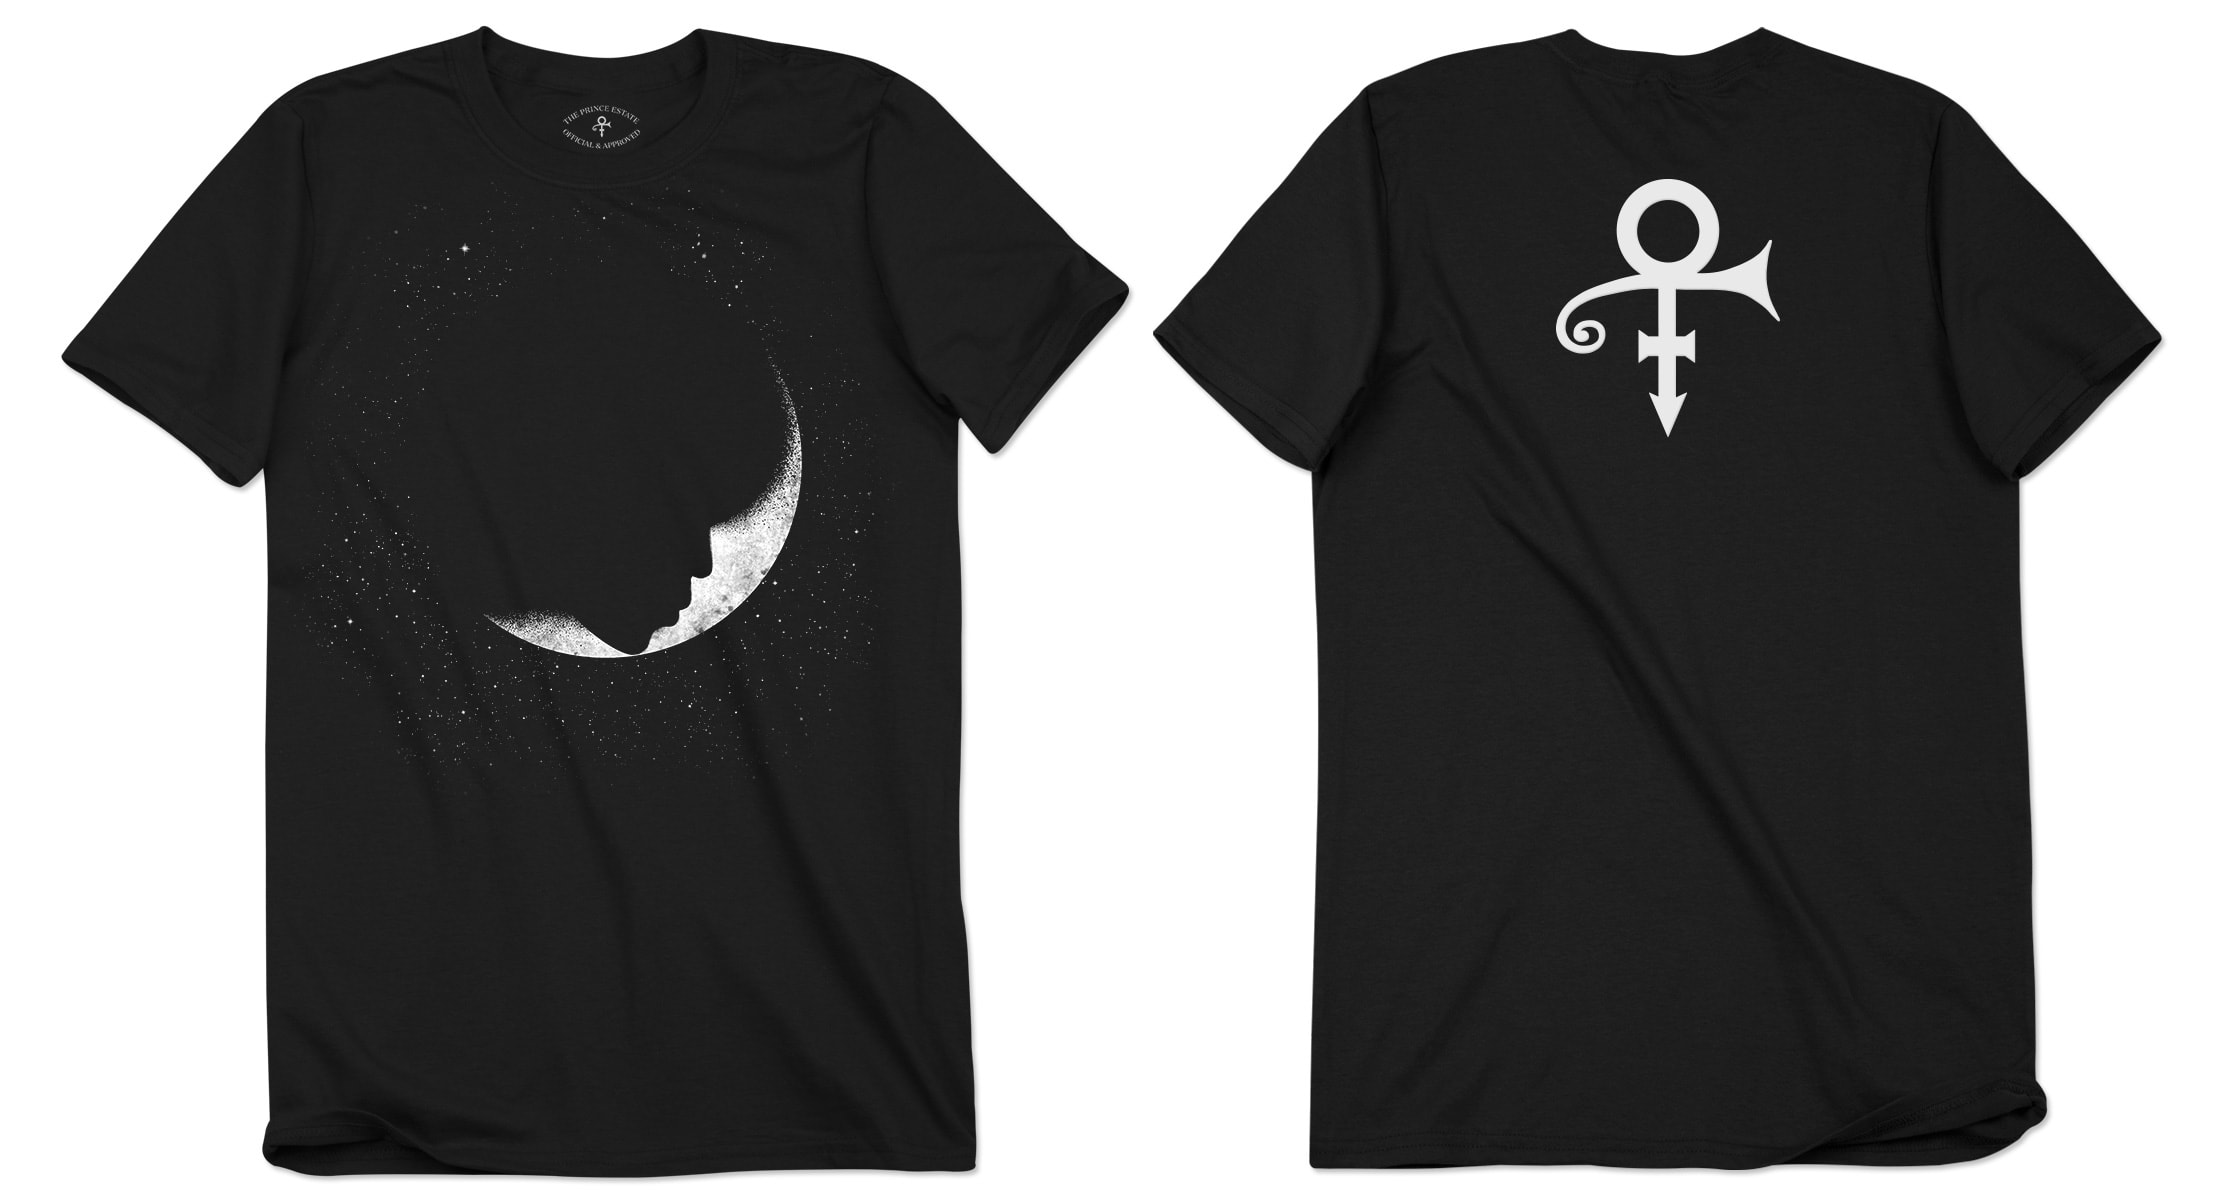 Prince Moon Fro t-shirt